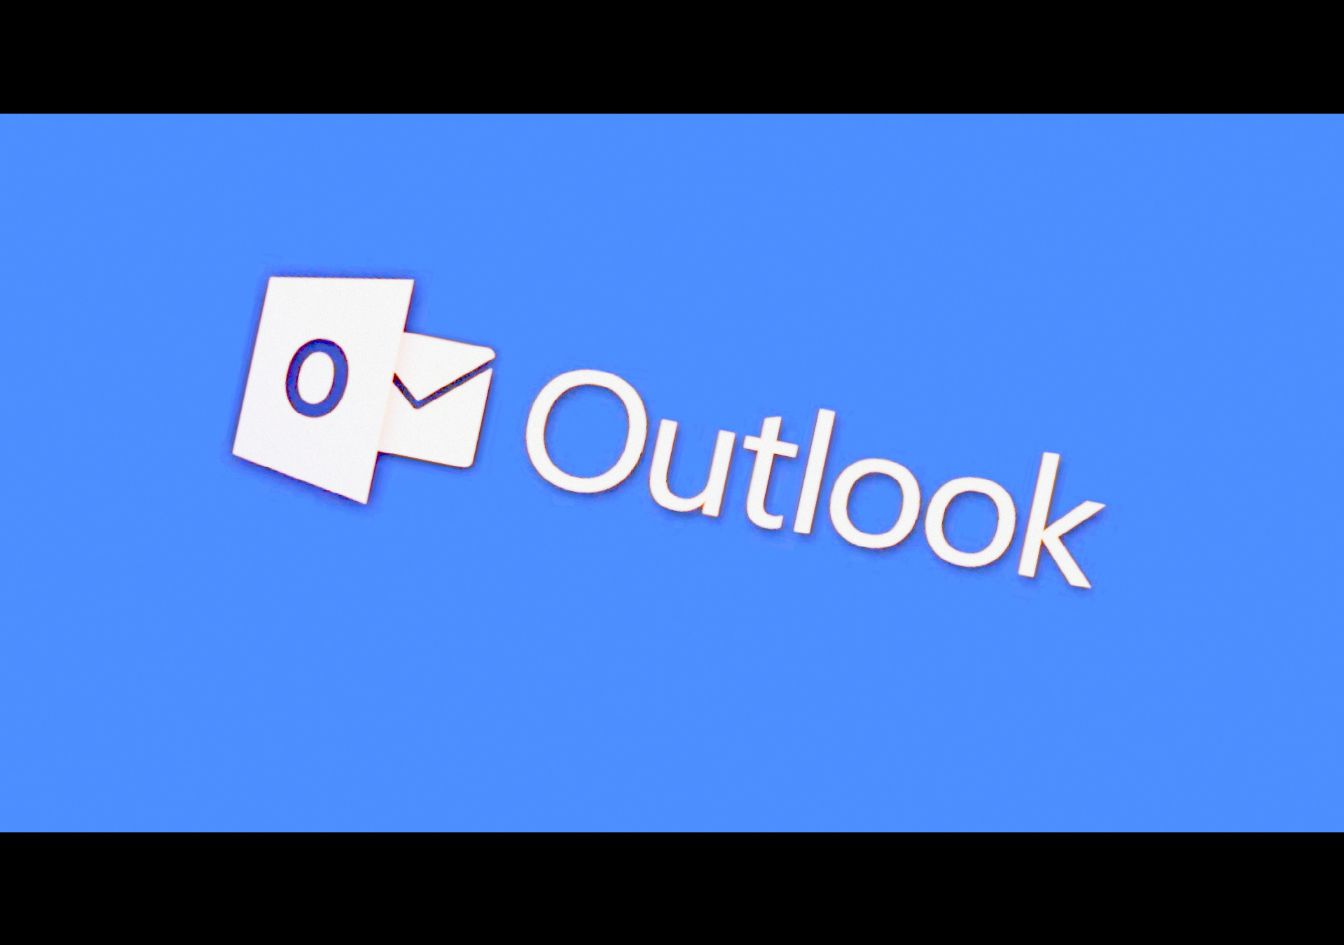 outlook 2019 gmail